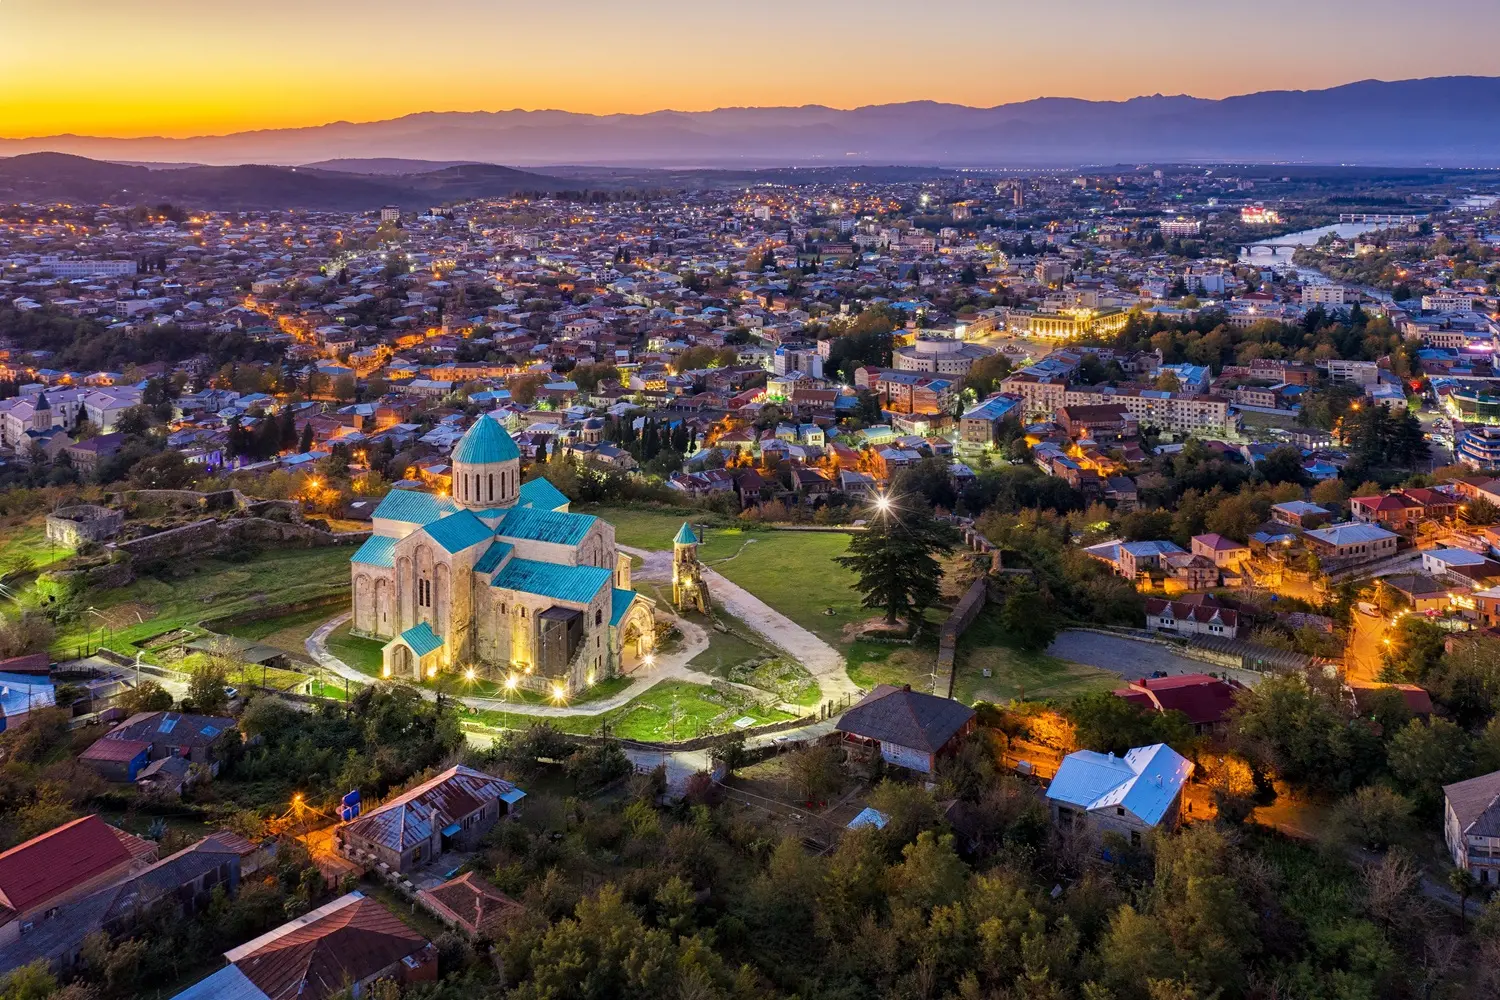 Forecasting for Outdoor Events in Kutaisi's City Parks